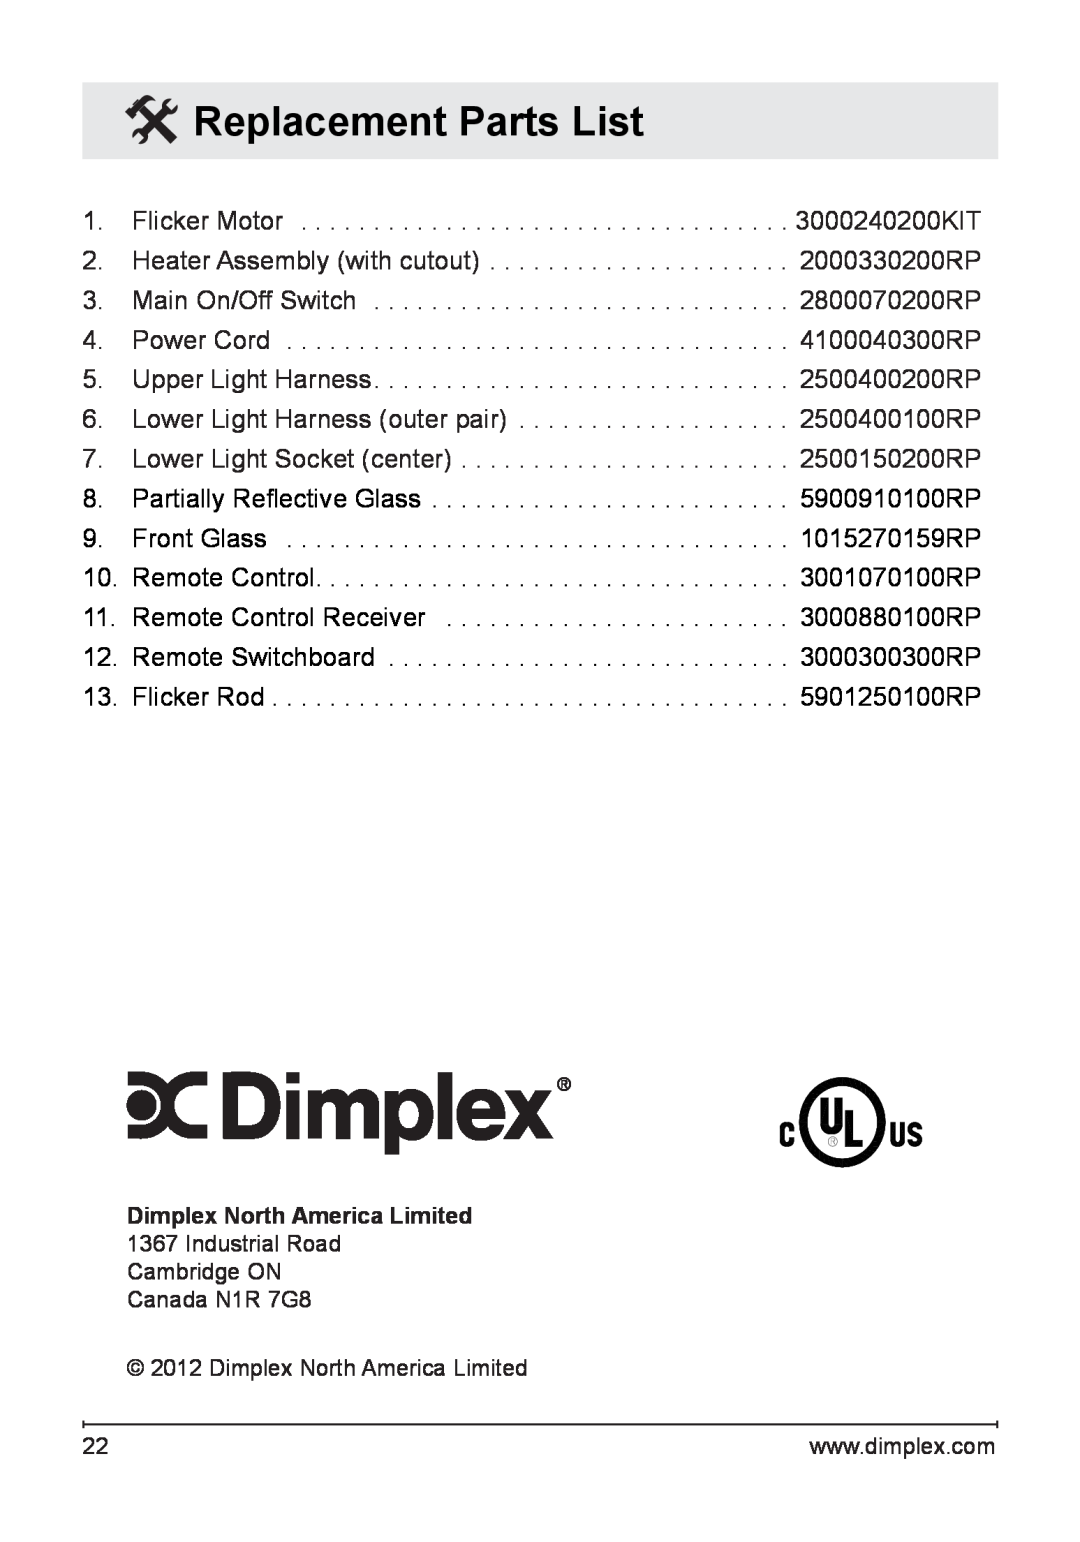 Dimplex DFG3033 owner manual Replacement Parts List, Dimplex North America Limited 